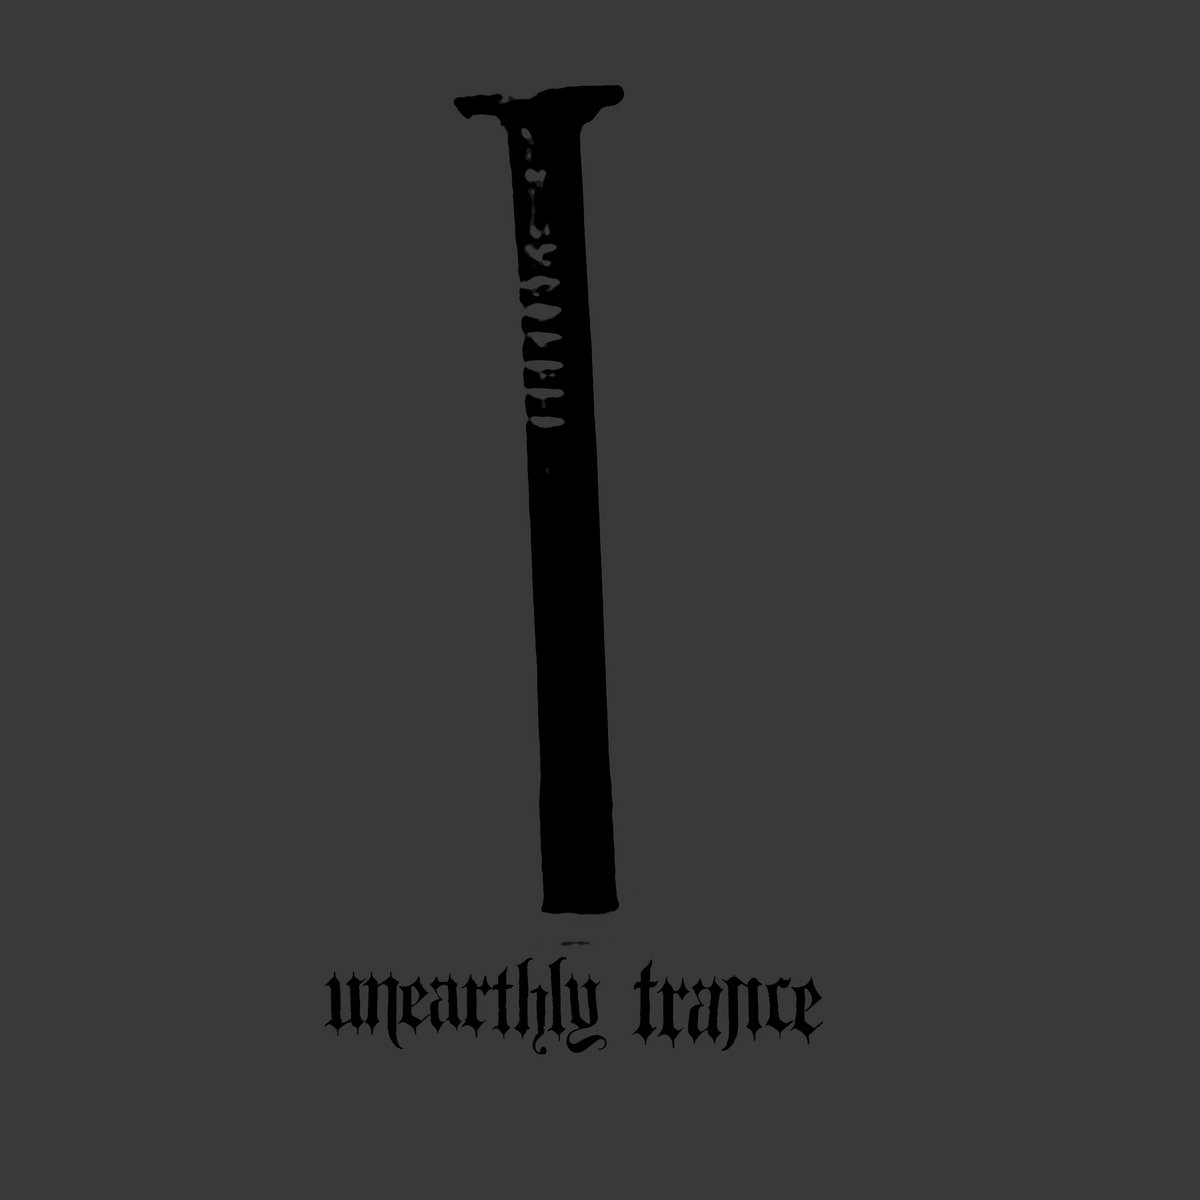 Unearthly Trance Wallpapers